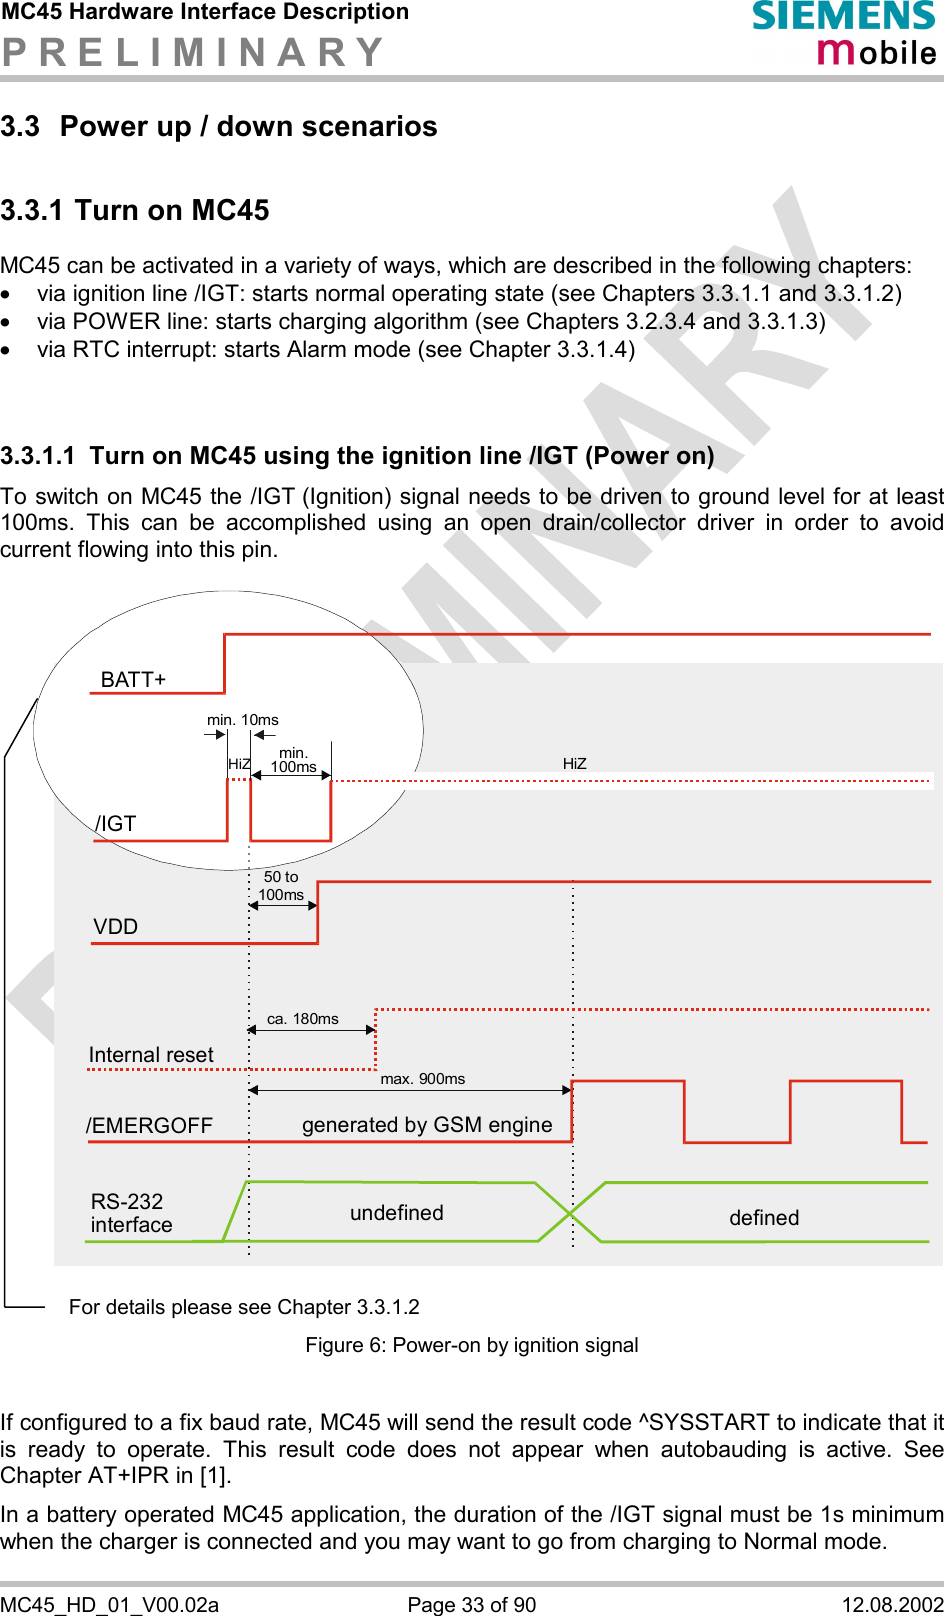 MC45 Hardware Interface Description P R E L I M I N A R Y      MC45_HD_01_V00.02a  Page 33 of 90  12.08.2002 3.3  Power up / down scenarios 3.3.1 Turn on MC45 MC45 can be activated in a variety of ways, which are described in the following chapters: ·  via ignition line /IGT: starts normal operating state (see Chapters 3.3.1.1 and 3.3.1.2) ·  via POWER line: starts charging algorithm (see Chapters 3.2.3.4 and 3.3.1.3) ·  via RTC interrupt: starts Alarm mode (see Chapter 3.3.1.4)   3.3.1.1  Turn on MC45 using the ignition line /IGT (Power on) To switch on MC45 the /IGT (Ignition) signal needs to be driven to ground level for at least 100ms. This can be accomplished using an open drain/collector driver in order to avoid current flowing into this pin.   Internal resetca. 180msgenerated by GSM engine/EMERGOFFmax. 900msRS-232 interface undefined definedVDD50 to100msBATT+/IGTmin. 10msmin.100ms HiZHiZ   Figure 6: Power-on by ignition signal  If configured to a fix baud rate, MC45 will send the result code ^SYSSTART to indicate that it is ready to operate. This result code does not appear when autobauding is active. See Chapter AT+IPR in [1]. In a battery operated MC45 application, the duration of the /IGT signal must be 1s minimum when the charger is connected and you may want to go from charging to Normal mode. For details please see Chapter 3.3.1.2 